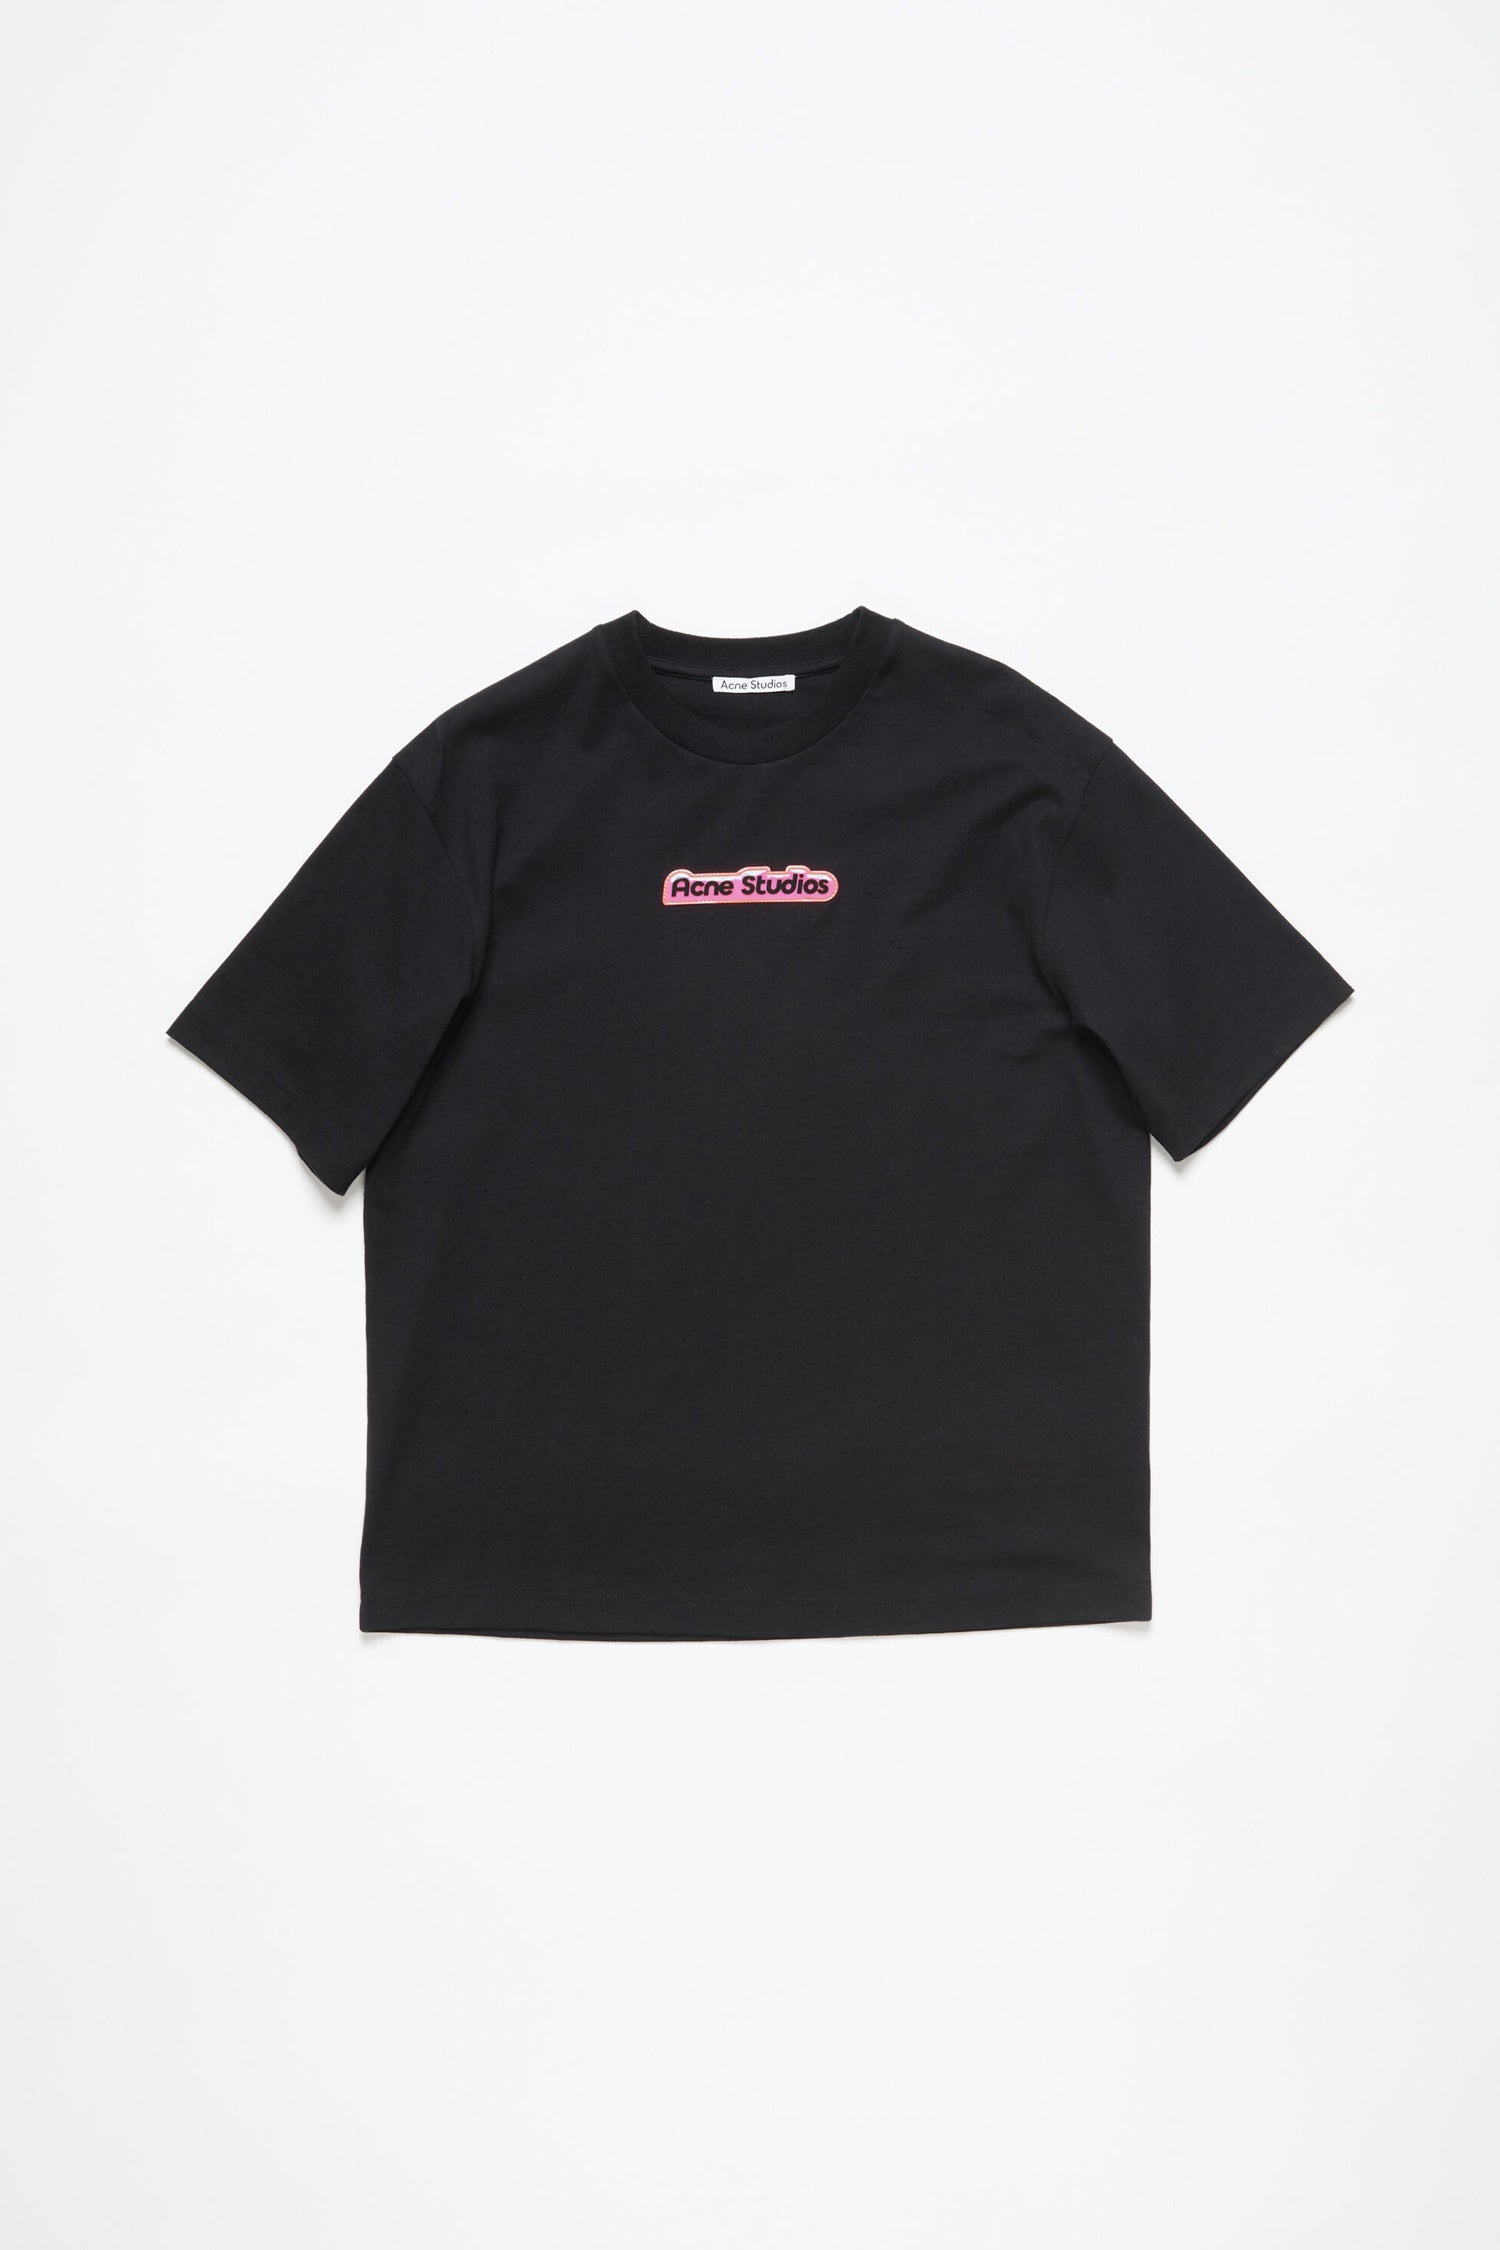 T-SHIRT PATCH LOGO IN BLACK, SS24